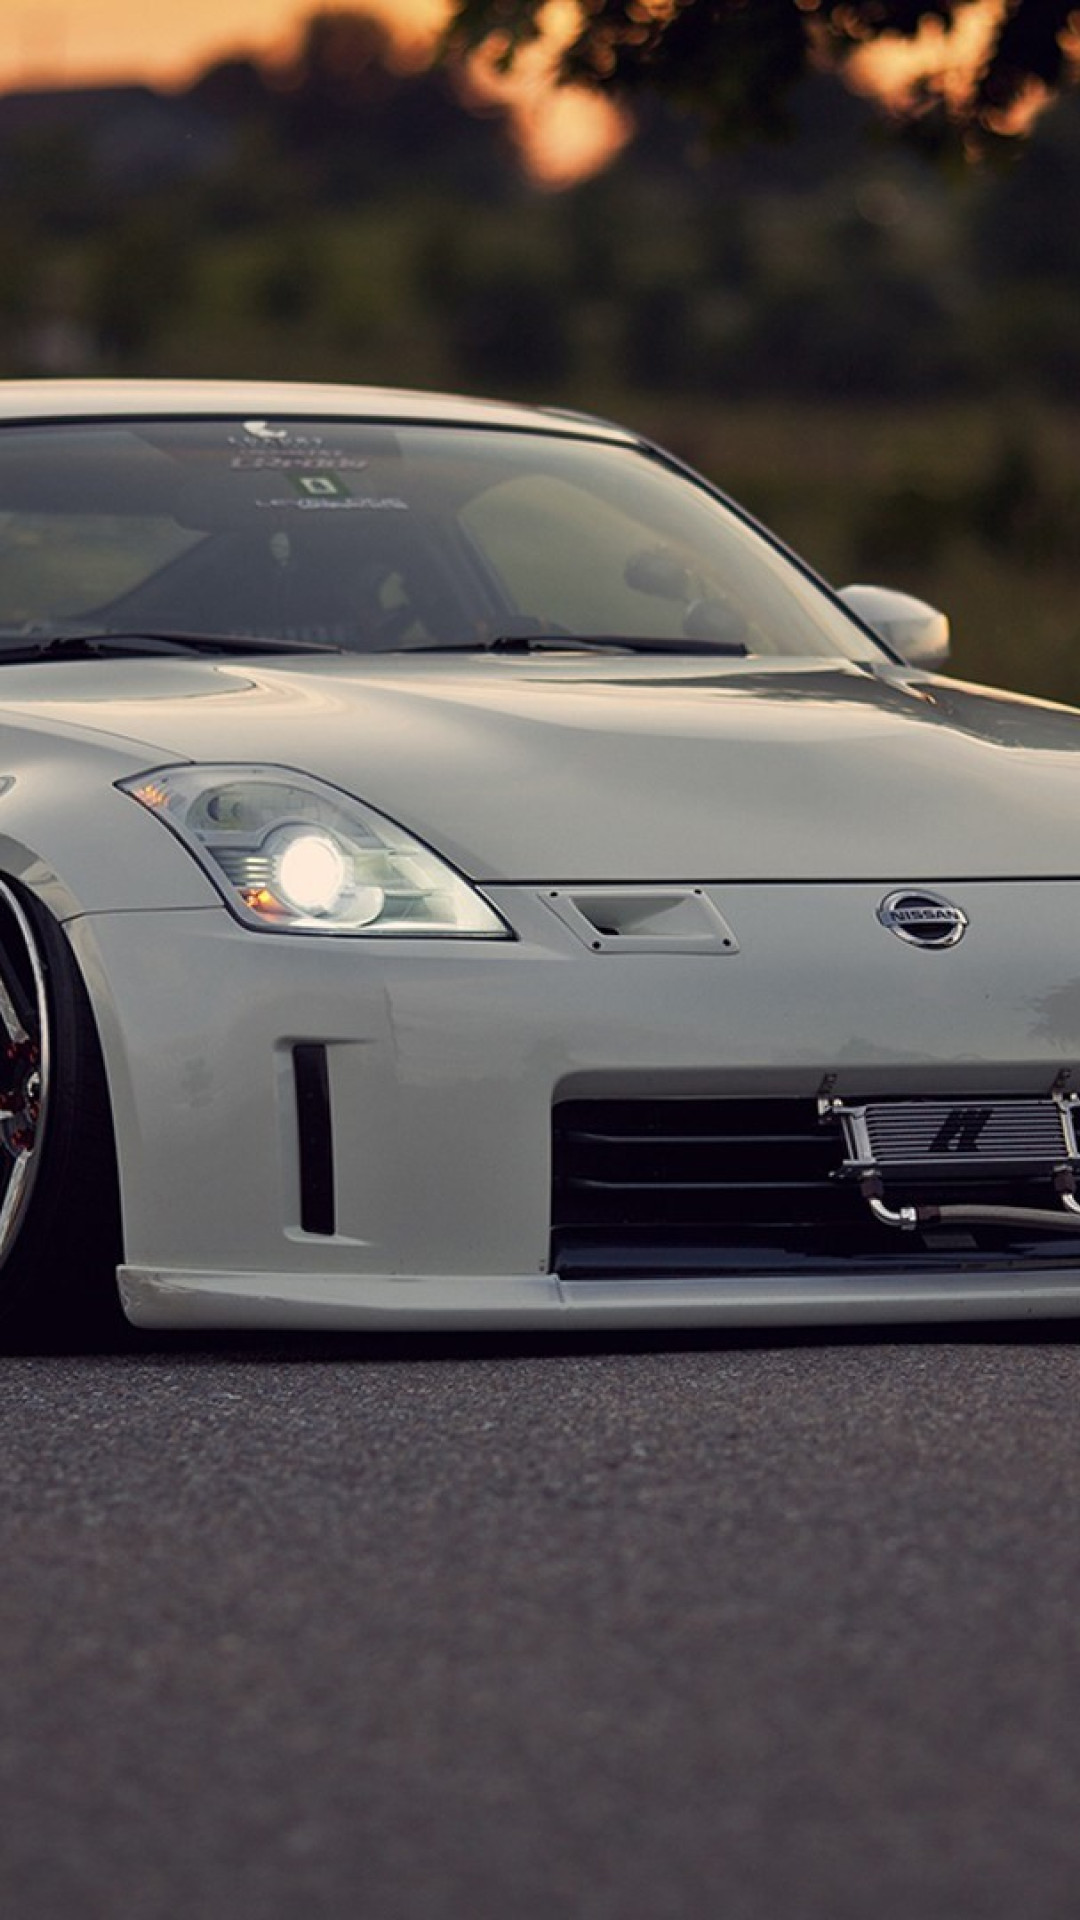 Fairlady Z Iphone Wallpapers